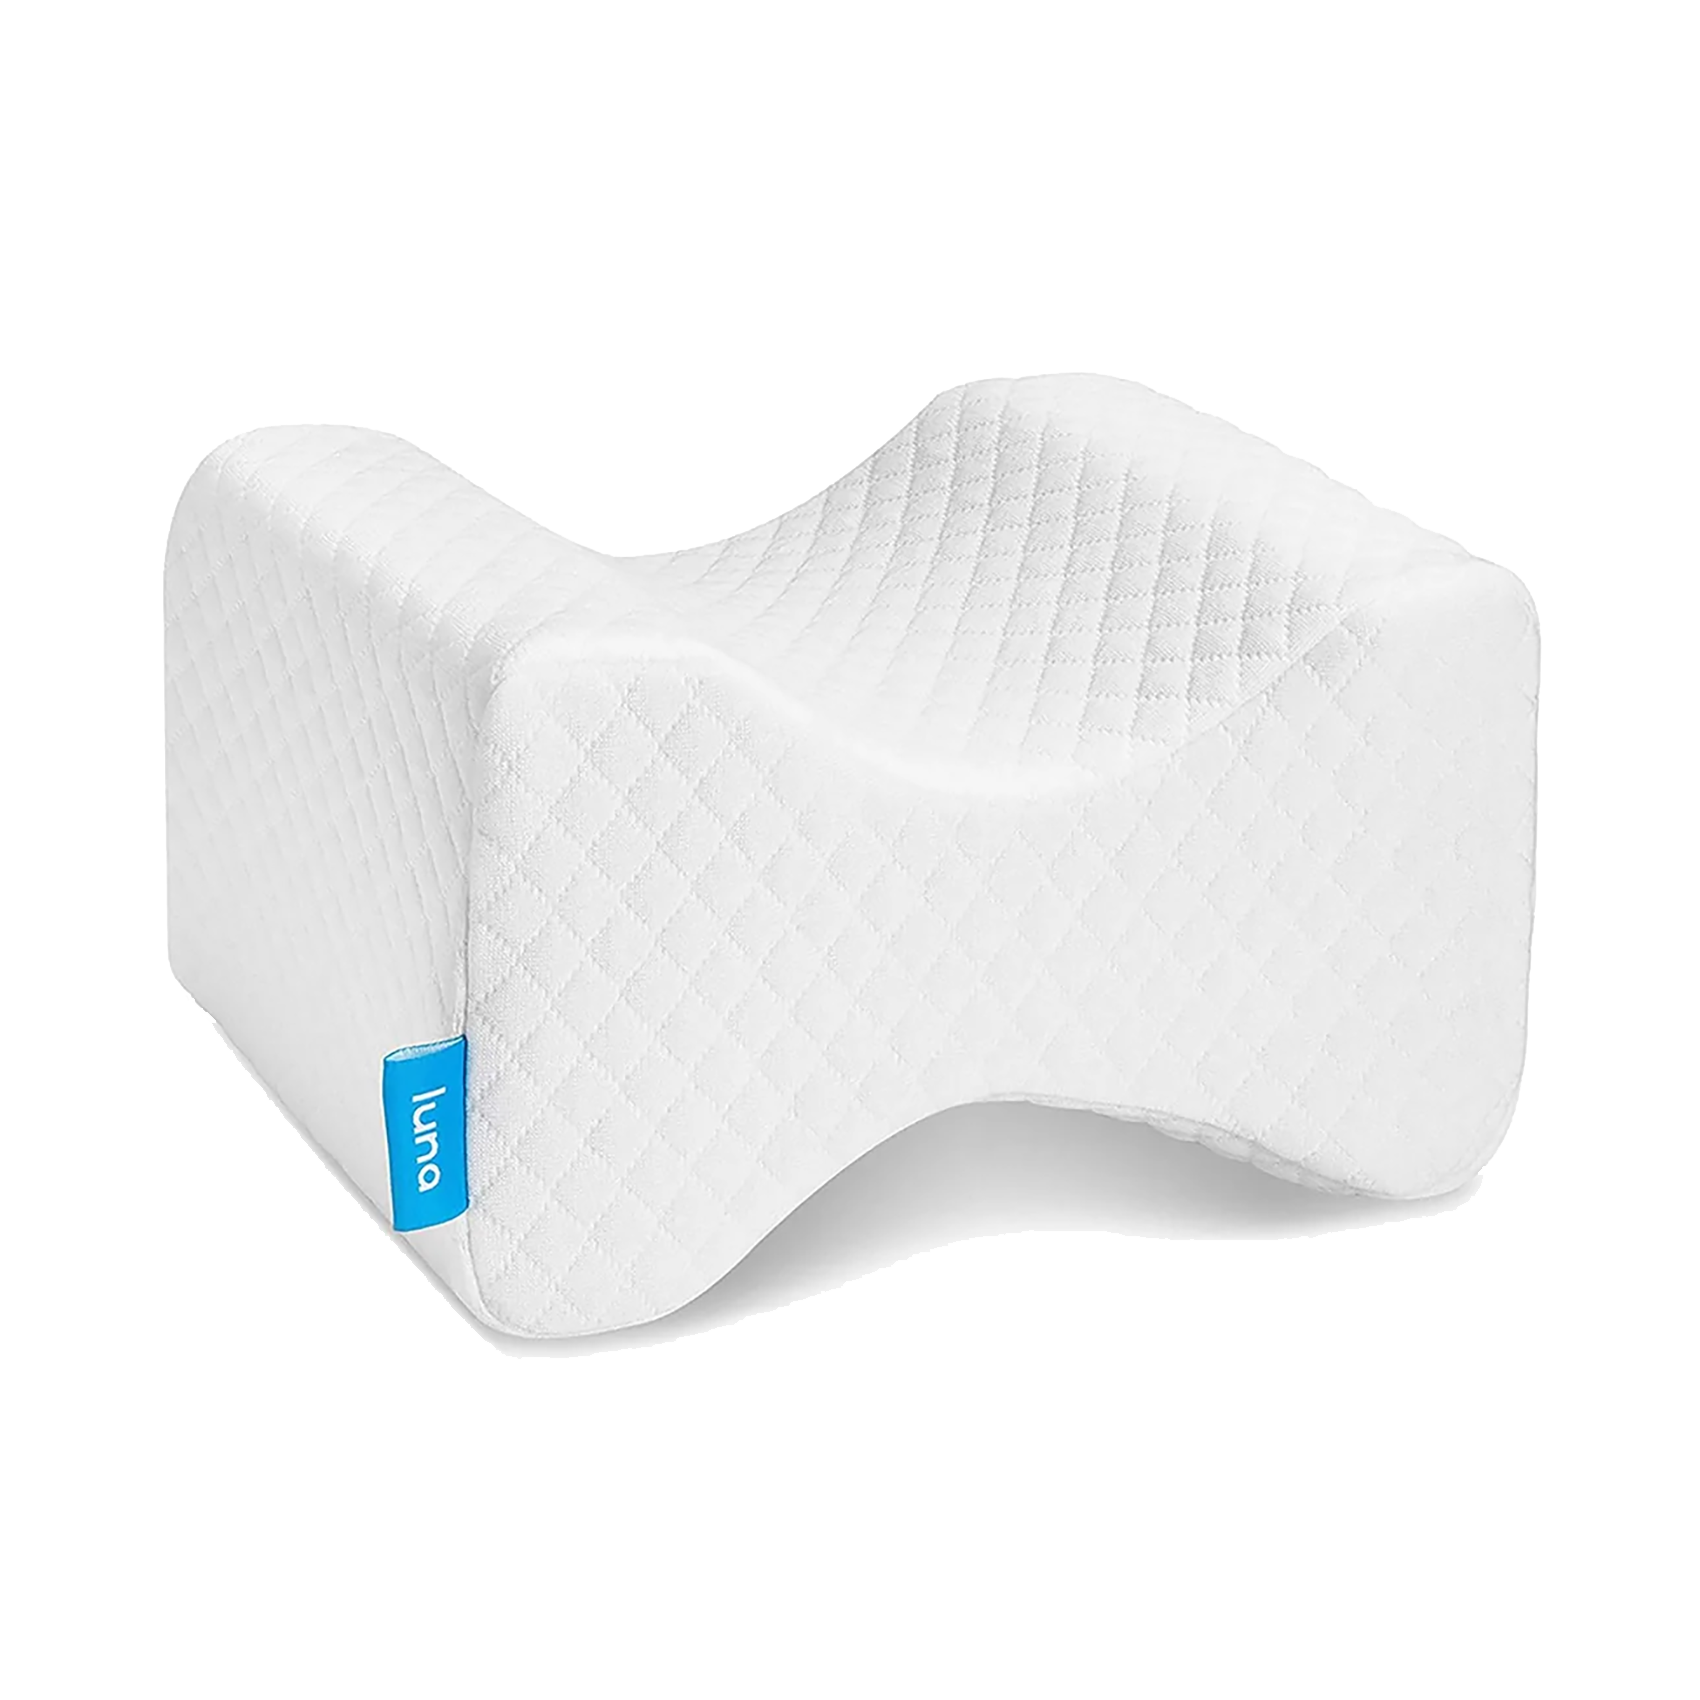 Orthopedic Knee Pillow Memory Foam Suitable for Side Sleepers Relief of  Hip, Back and Knees 